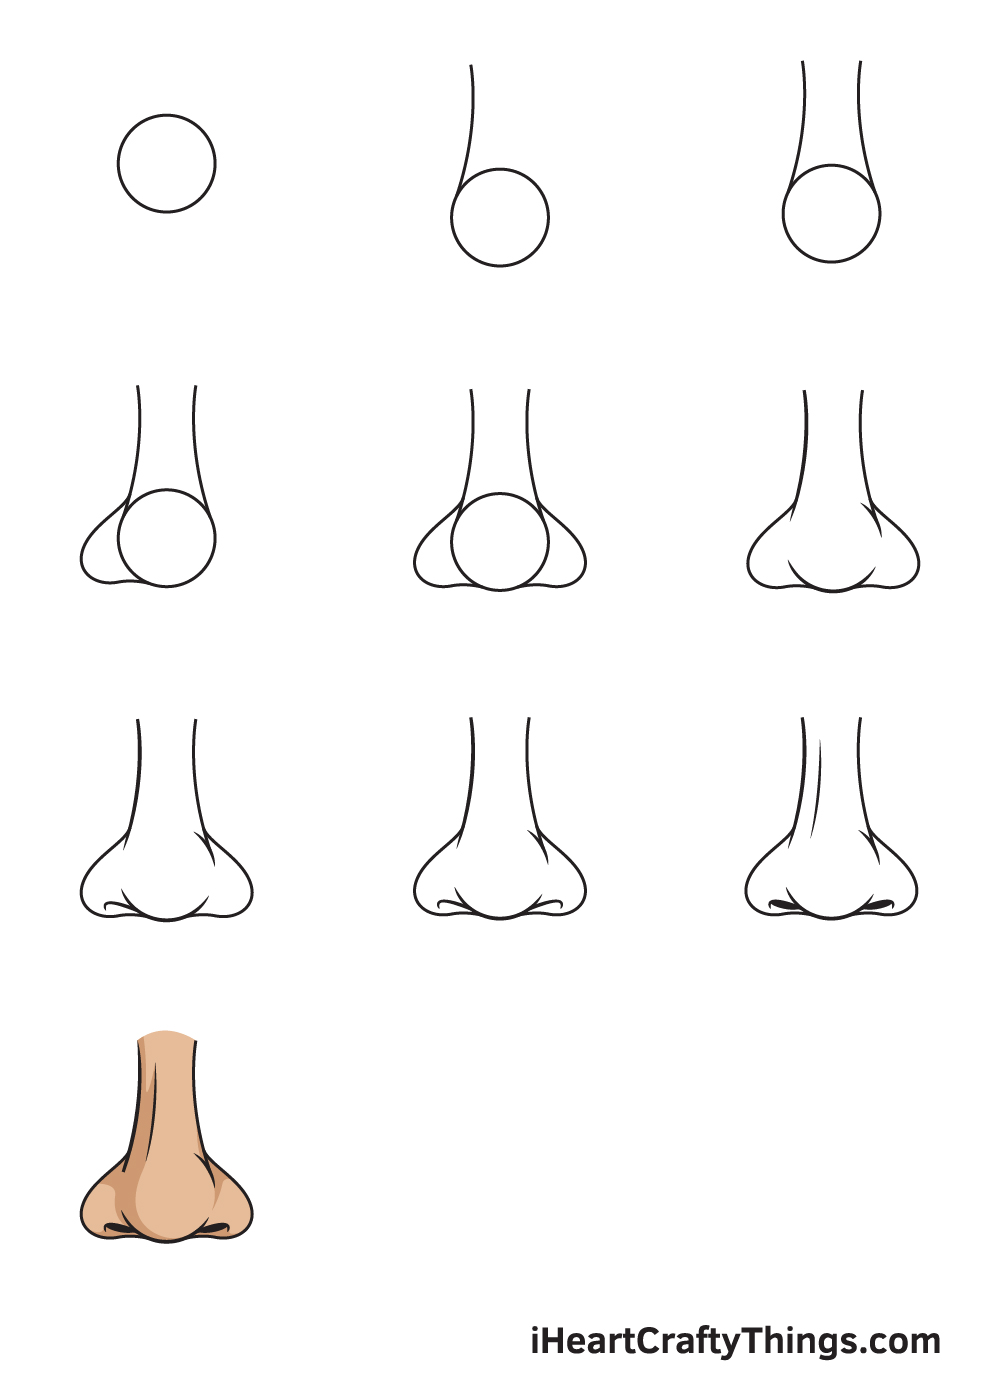 Nose Drawing — How To Draw A Nose Step By Step